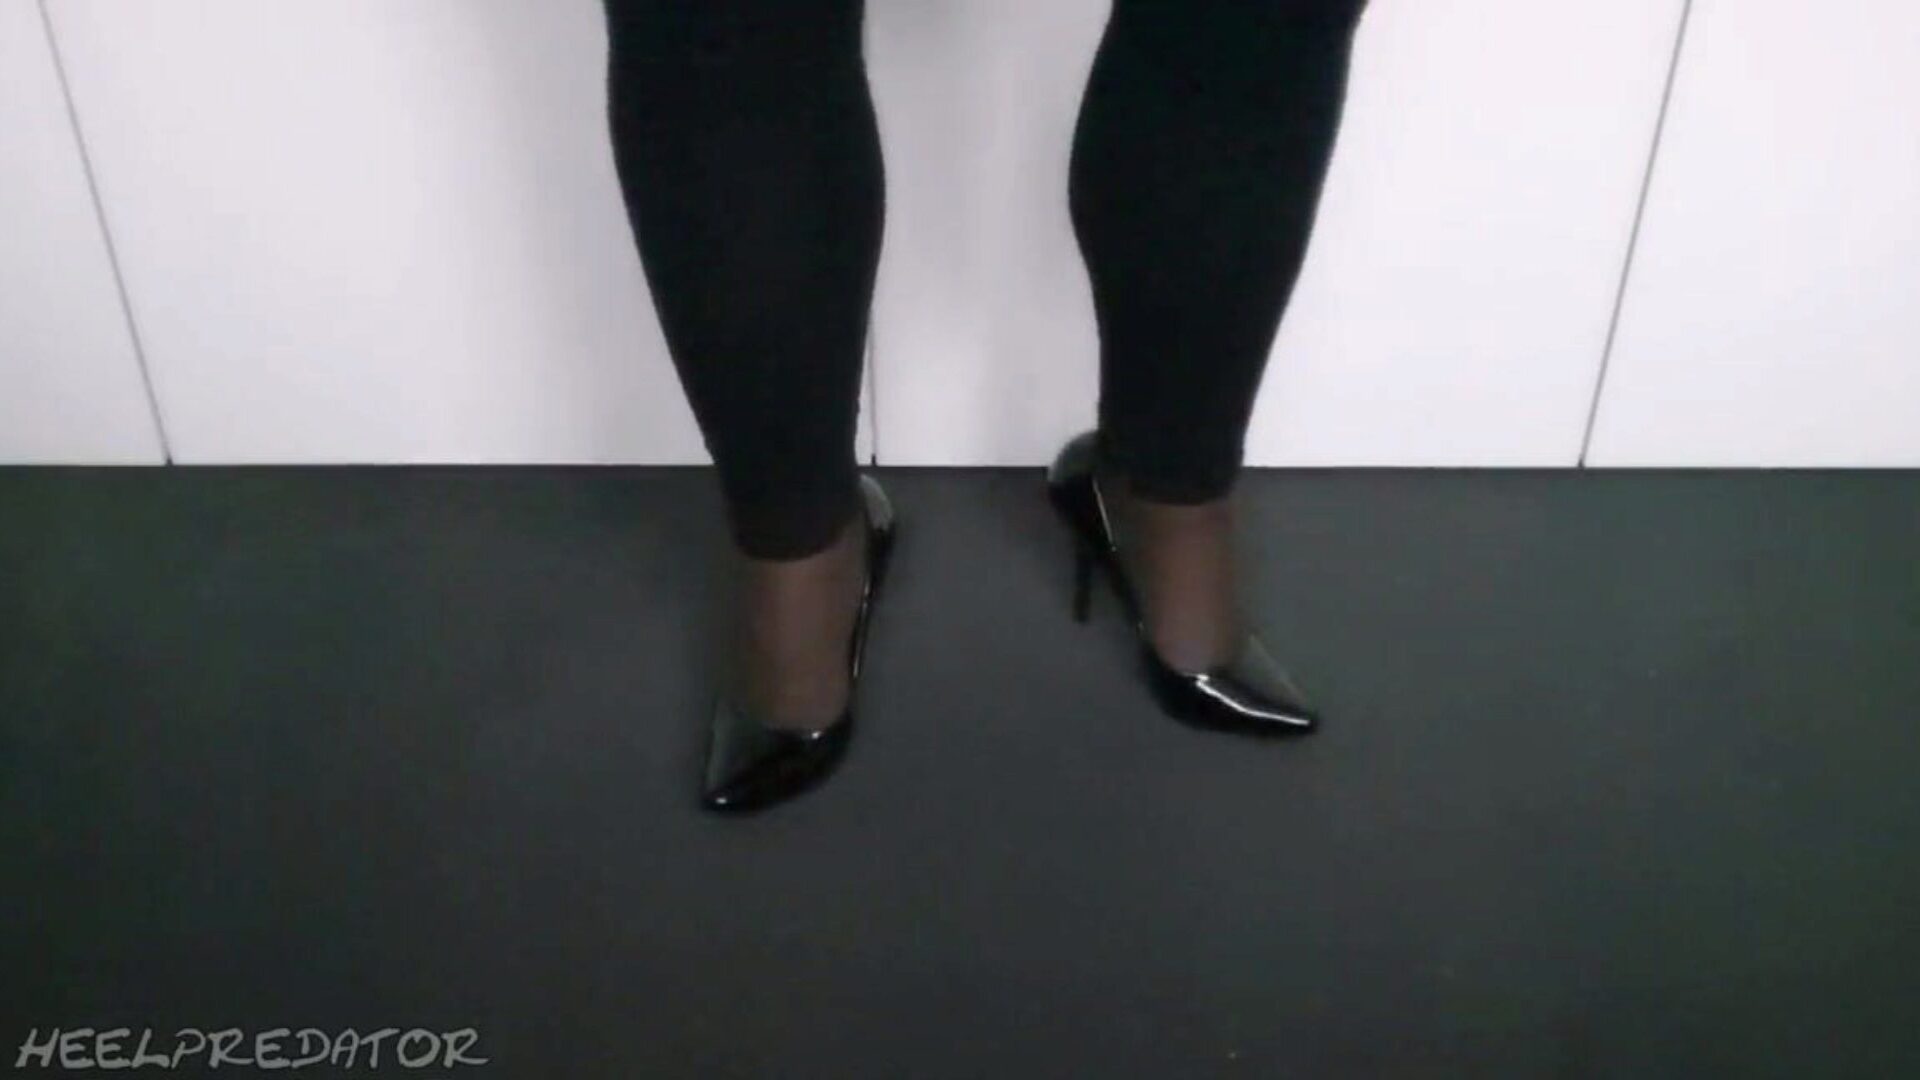 Showing My New Black Patent Heels, Free Porn 43: xHamster Watch Showing My New Black Patent Heels clip on xHamster, the thickest HD hookup tube web resource with tons of free Free Black Pornhub & Black Twitter pornography episodes